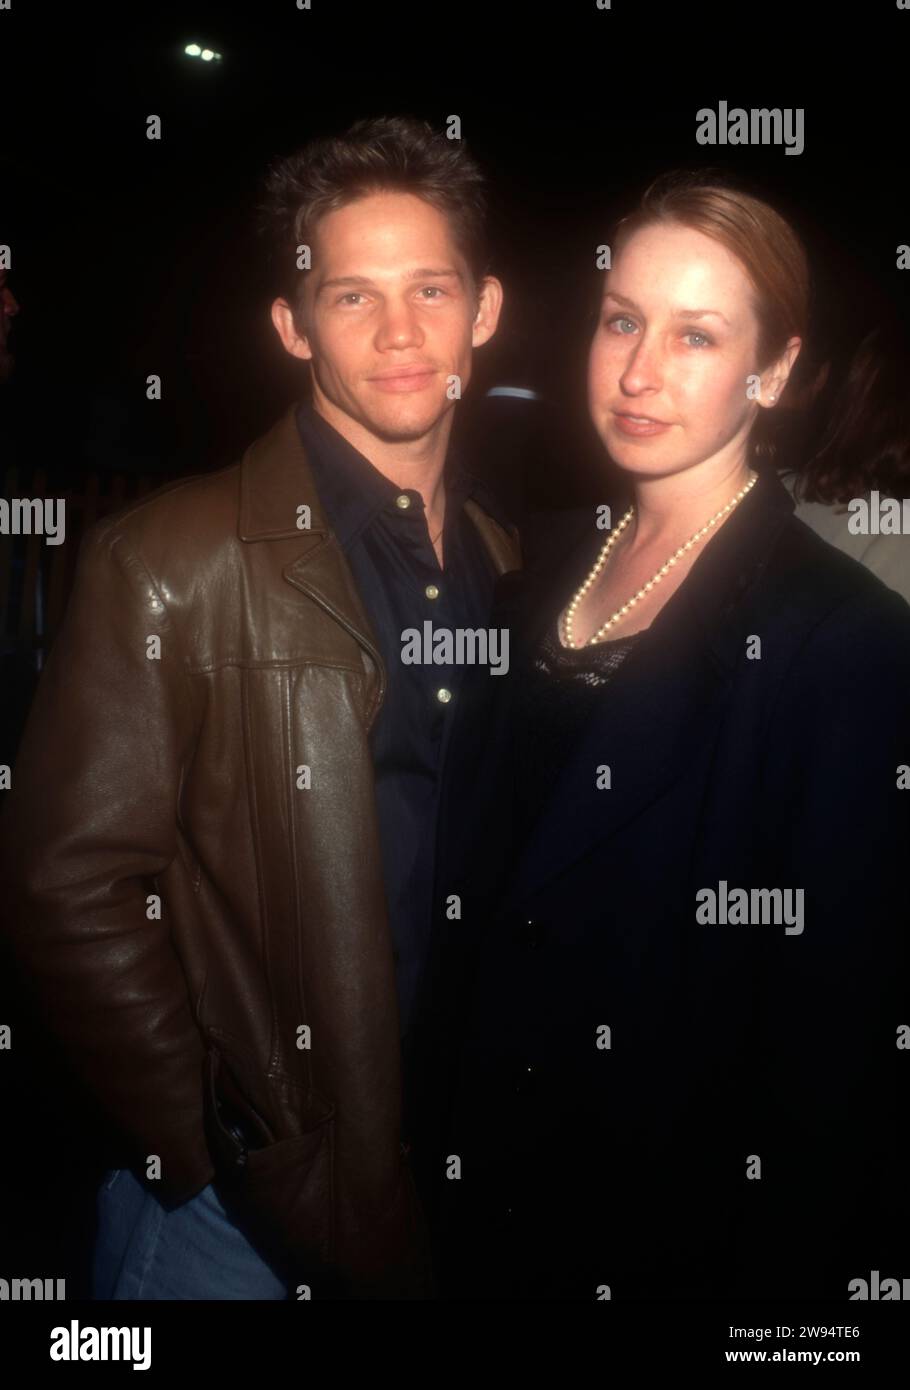 Santa Monica, California, USA 26th September 1996 Actor Jack Noseworthy and Kitty attend Cirque Du Soleil ÔQuidamÕ Opening Night on September 26, 1996 at Santa Monica Beach in Santa Monica, California, USA. Photo by Barry King/Alamy Stock Photo Stock Photo